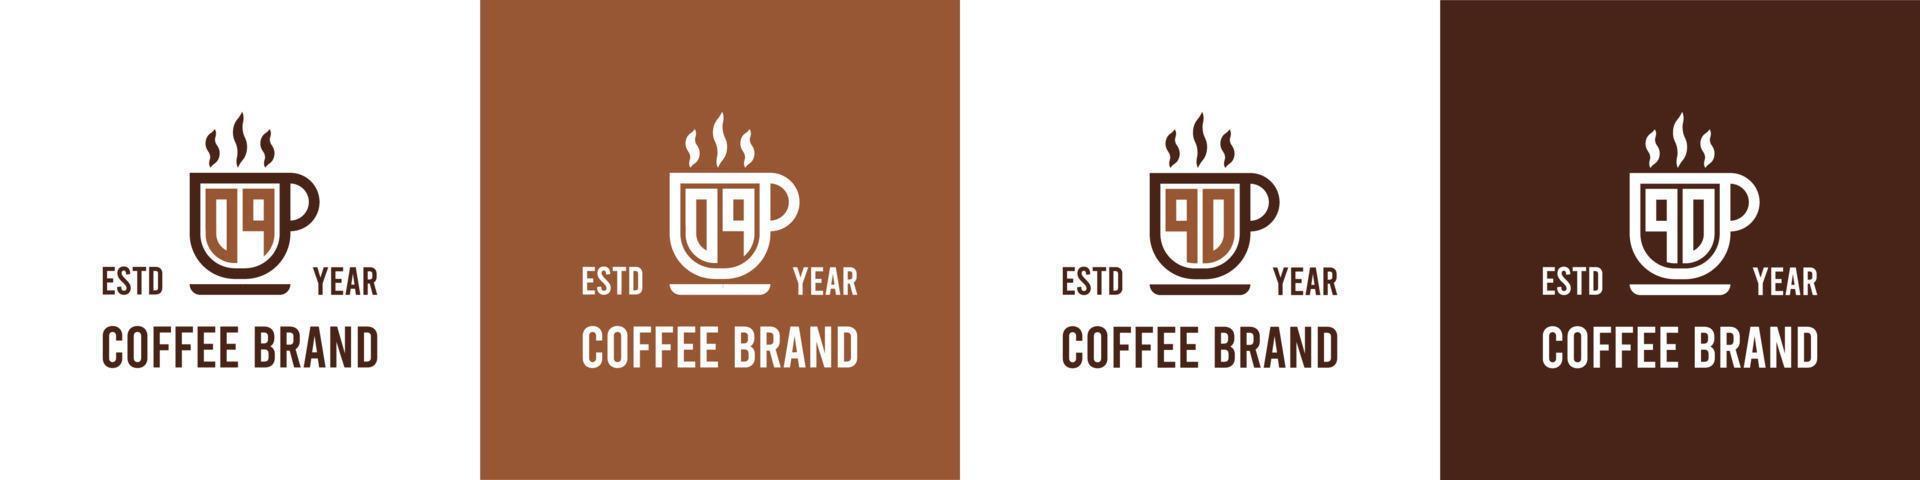 Letter OQ and QO Coffee Logo, suitable for any business related to Coffee, Tea, or Other with OQ or QO initials. vector